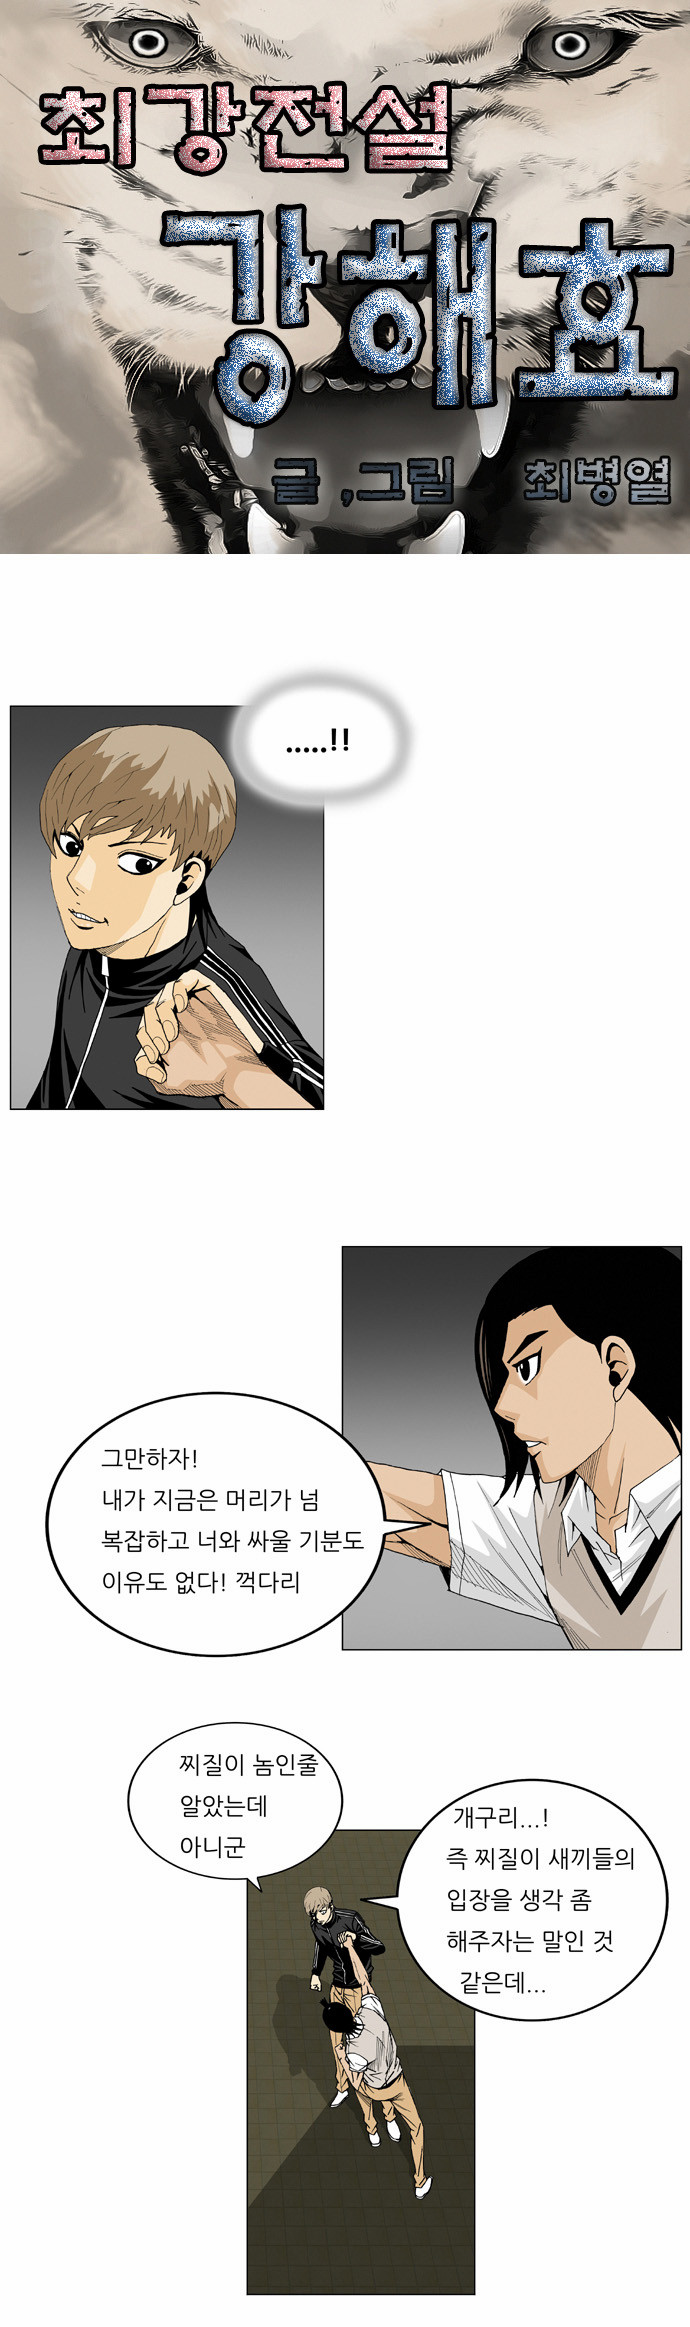 Ultimate Legend - Kang Hae Hyo - Chapter 19 - Page 2